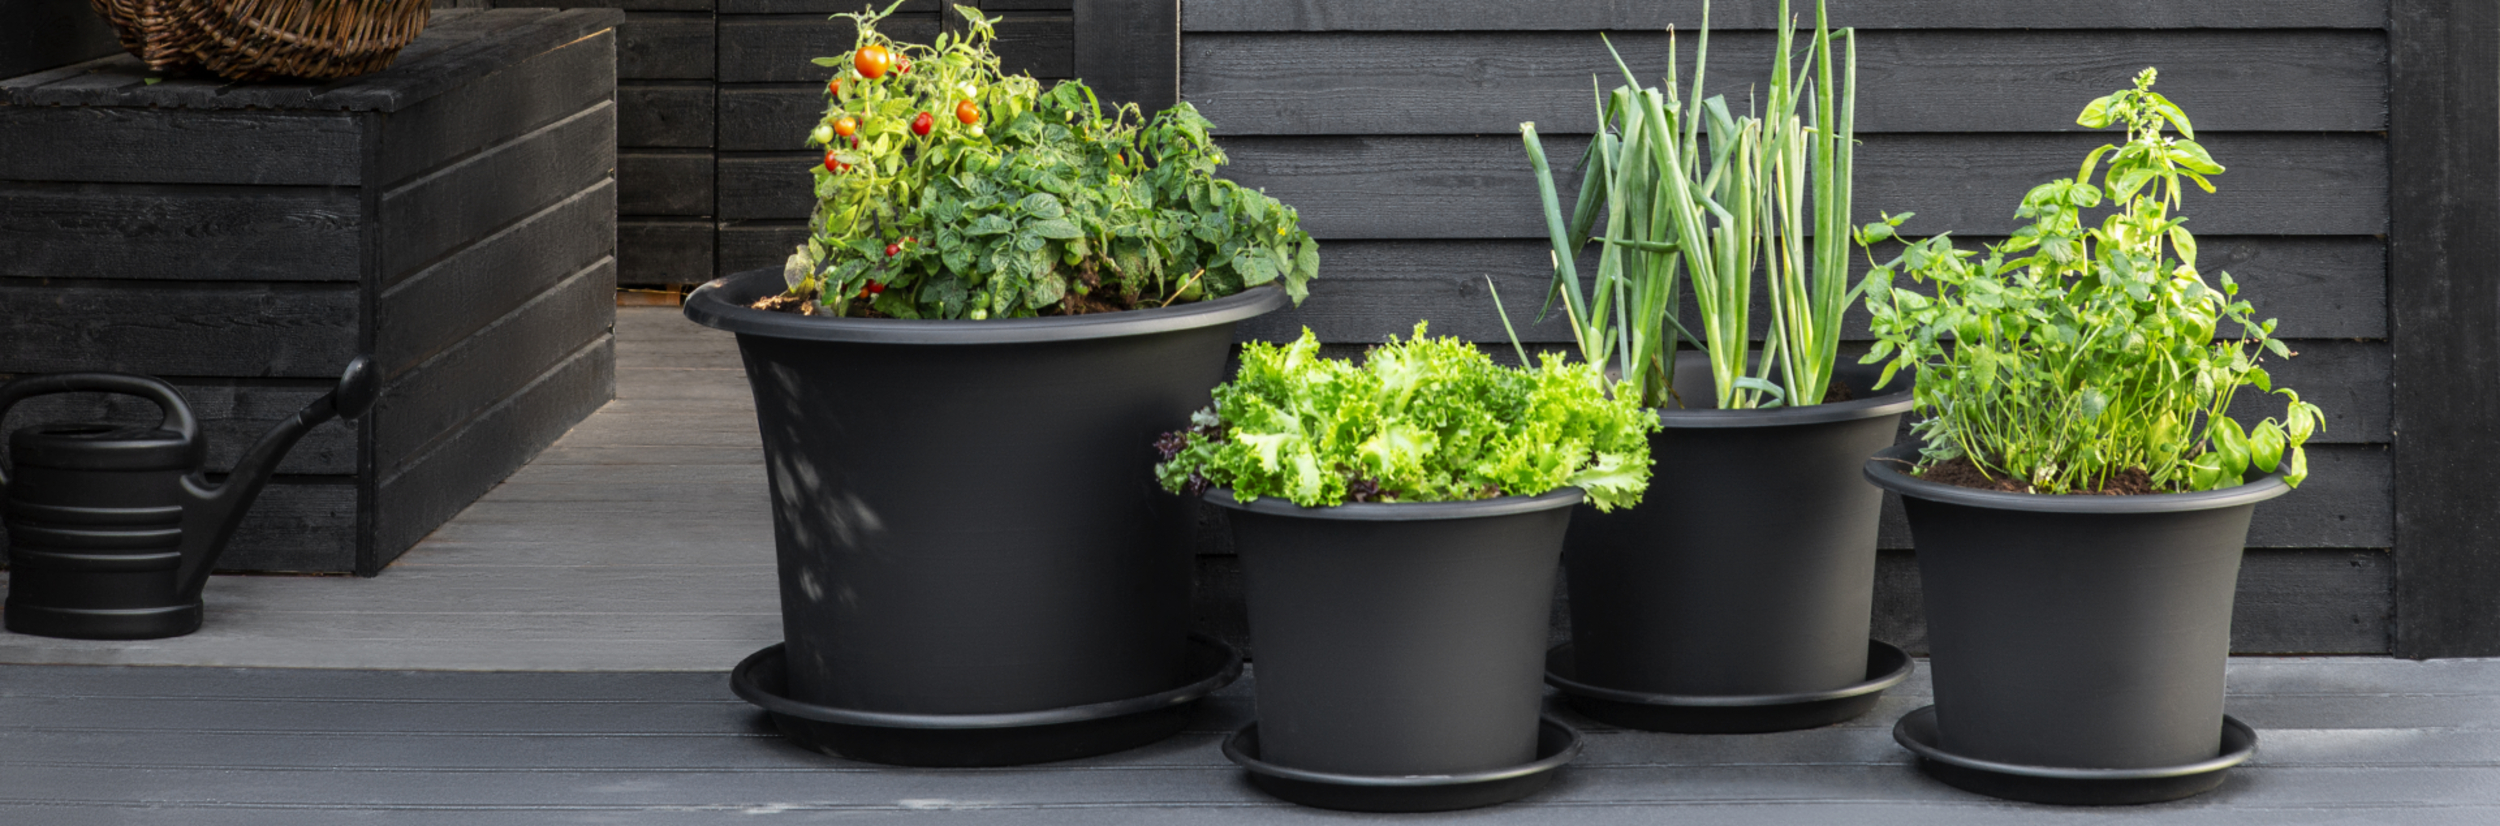 Pots in recycled material